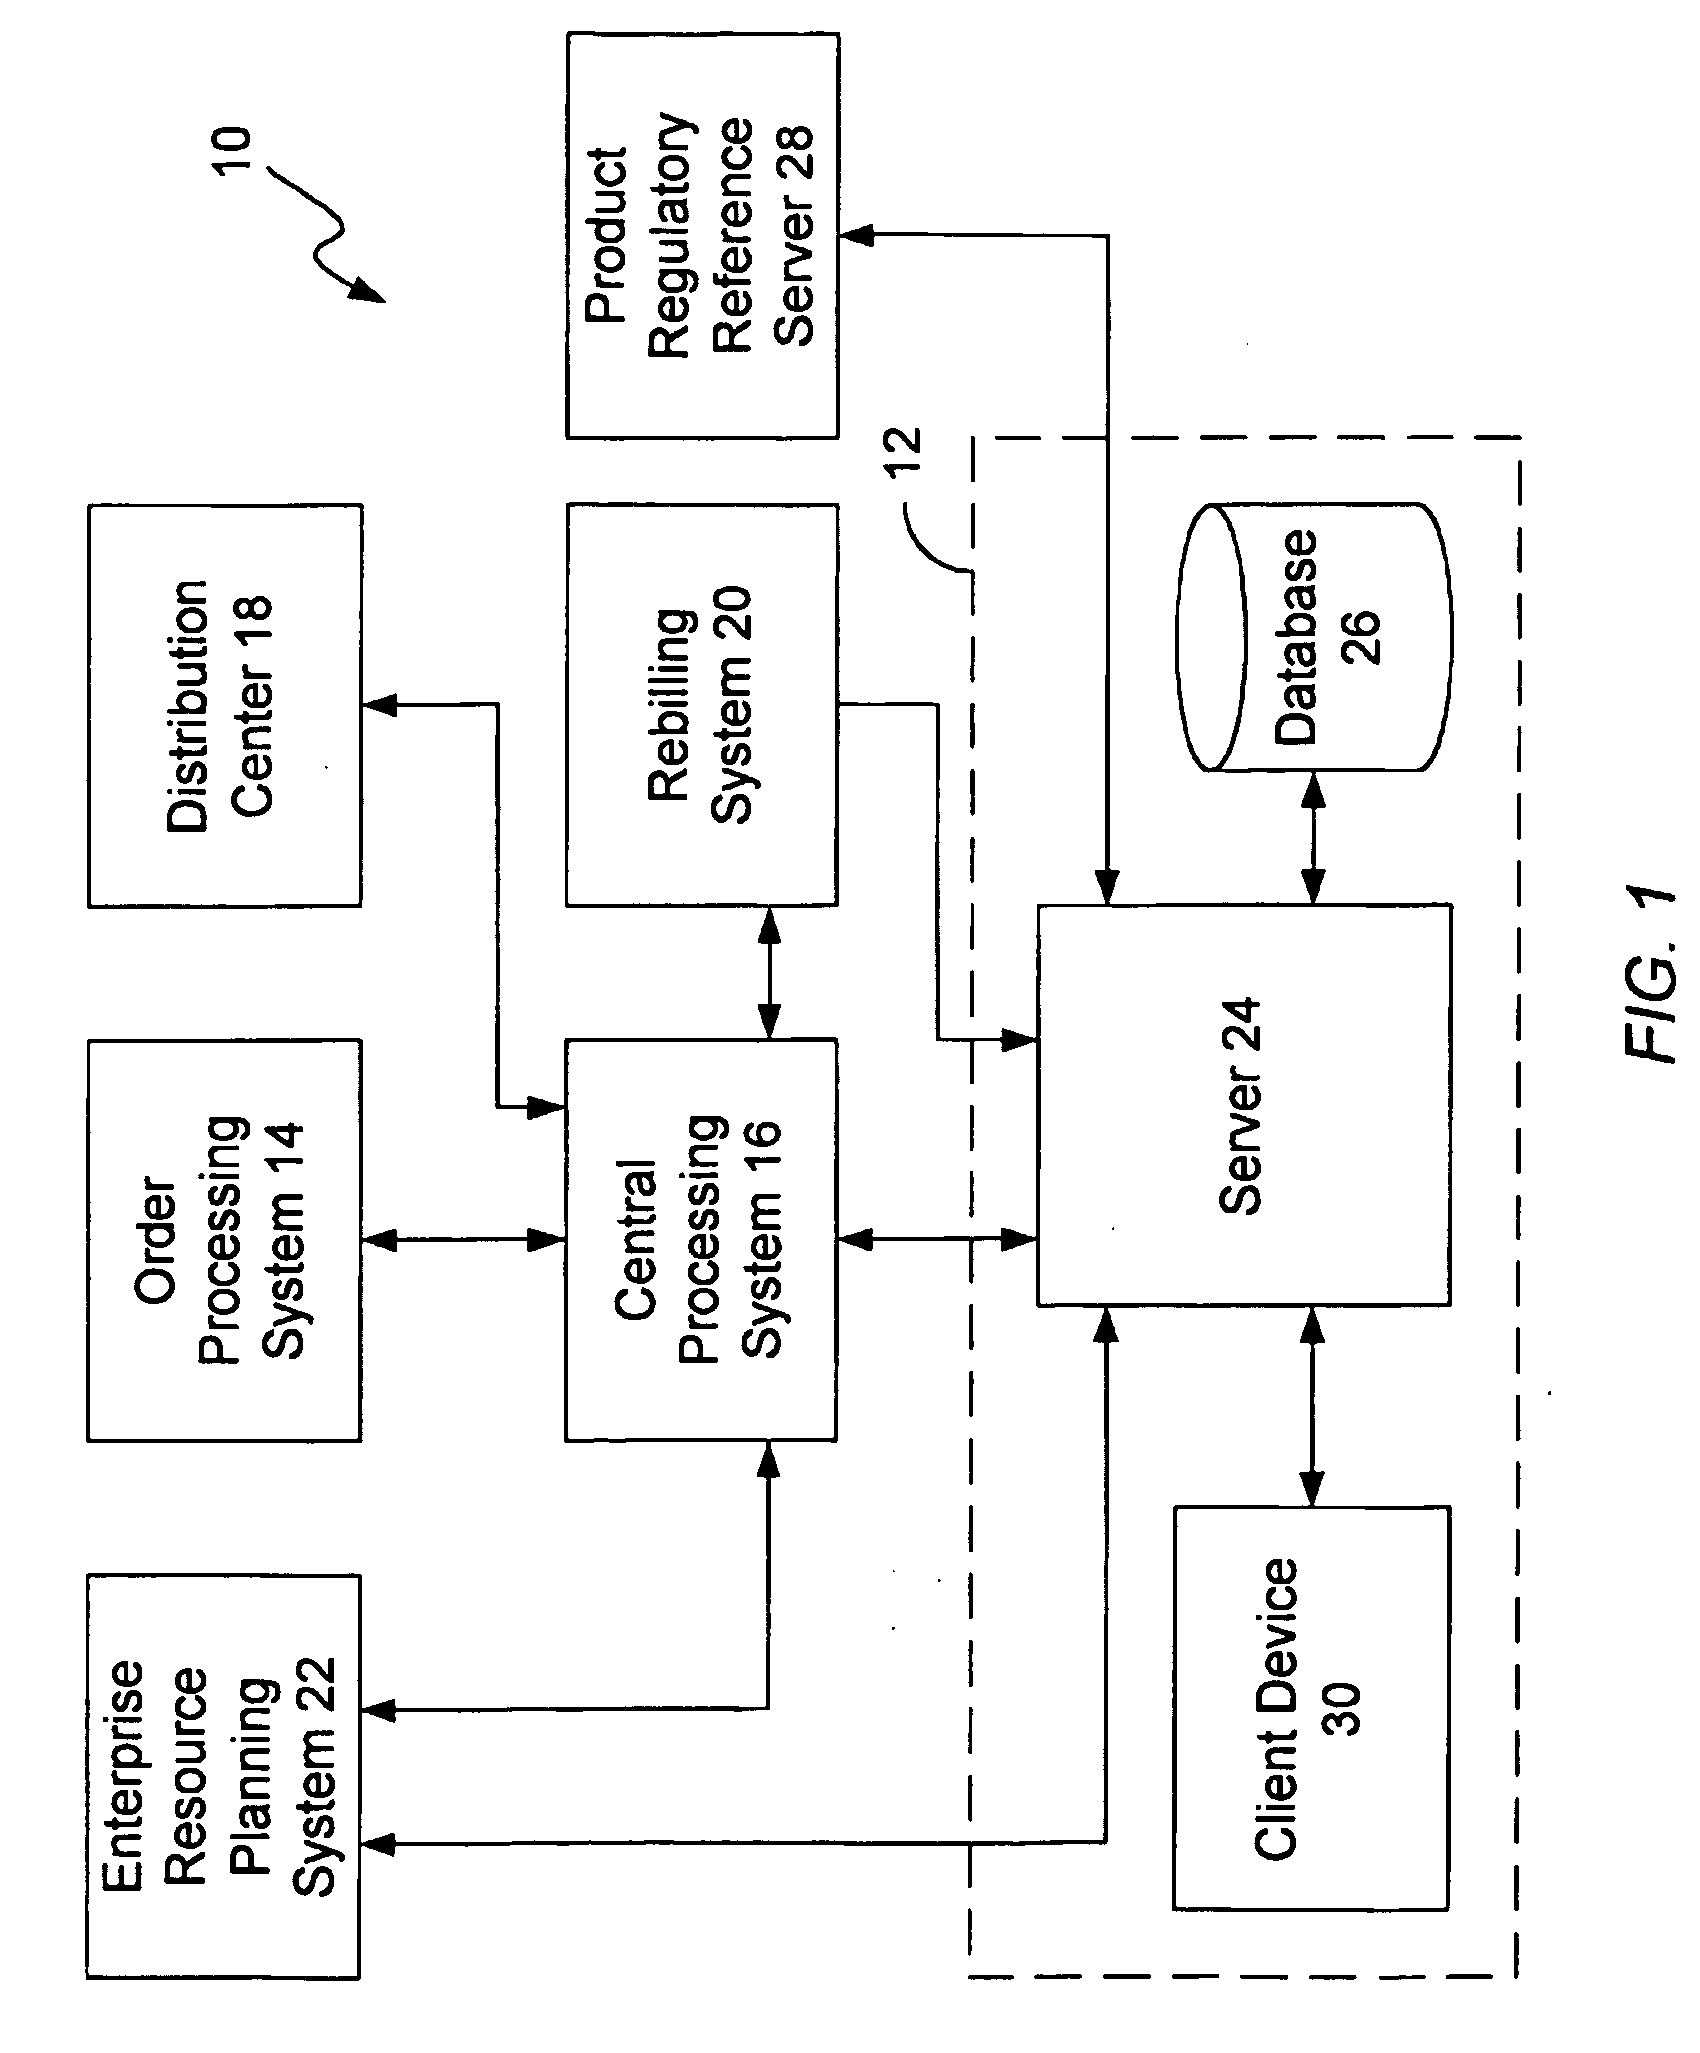 Order fulfillment architecture having an electronic customs invoice system